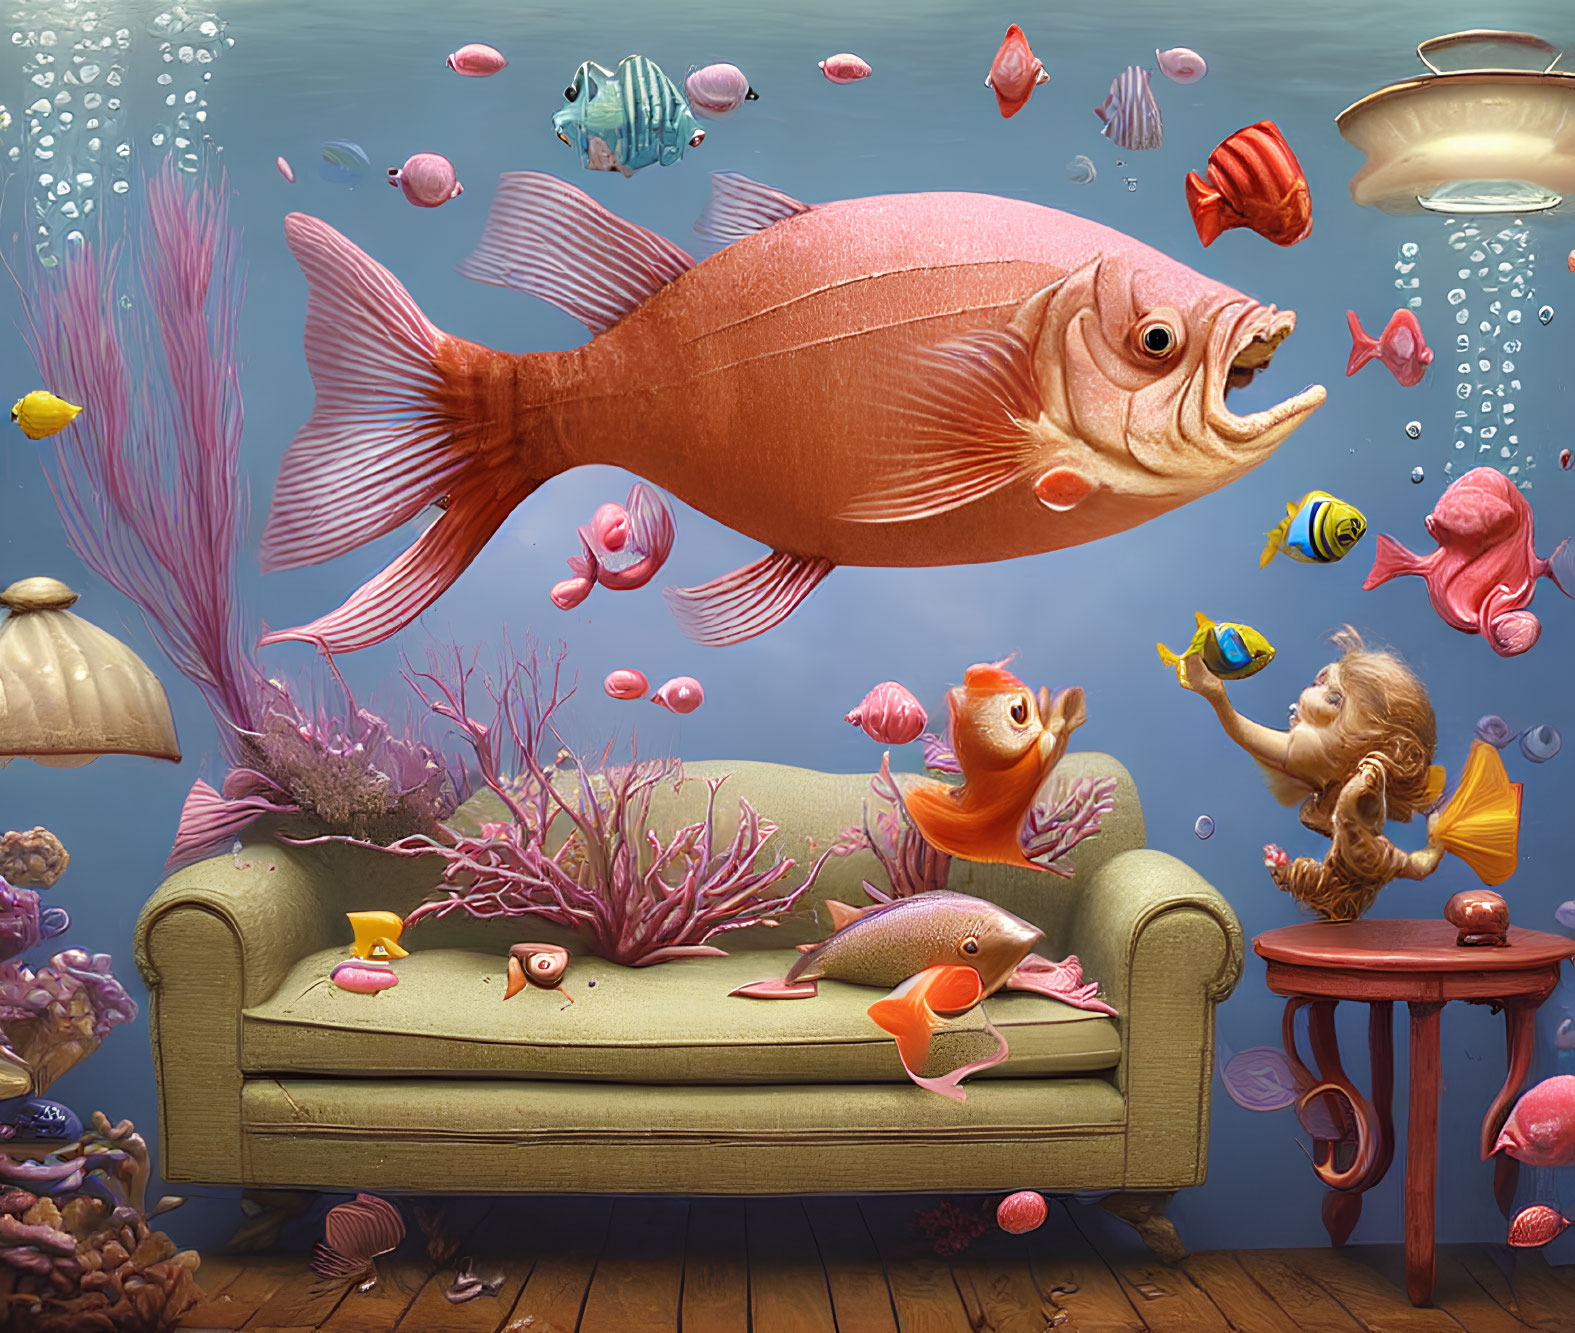 Colorful Fish Interact with Furniture in Underwater Scene